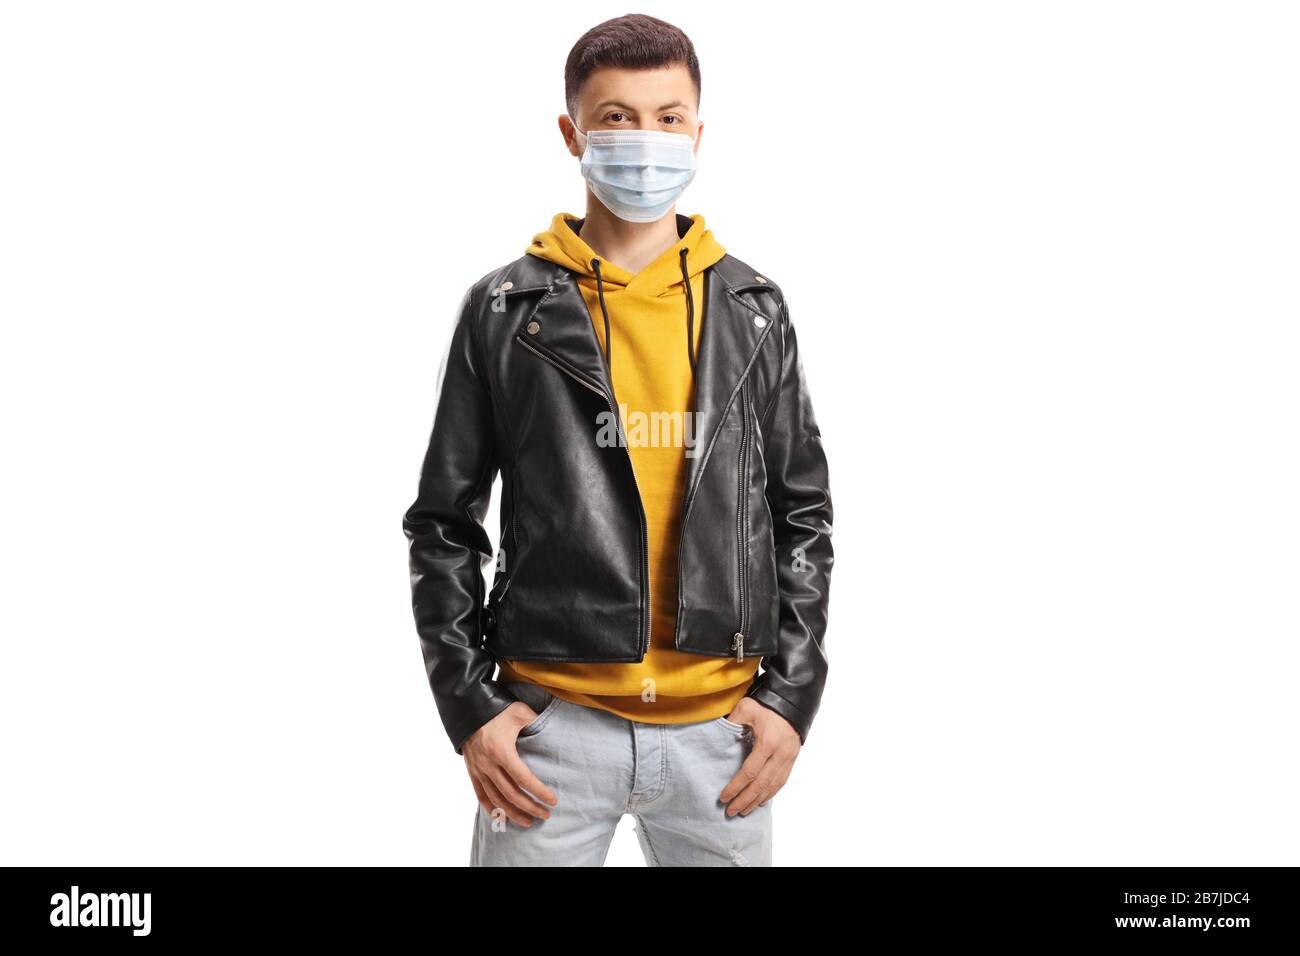 Young guy wearing a medical face mask isolated on white background Stock Photo